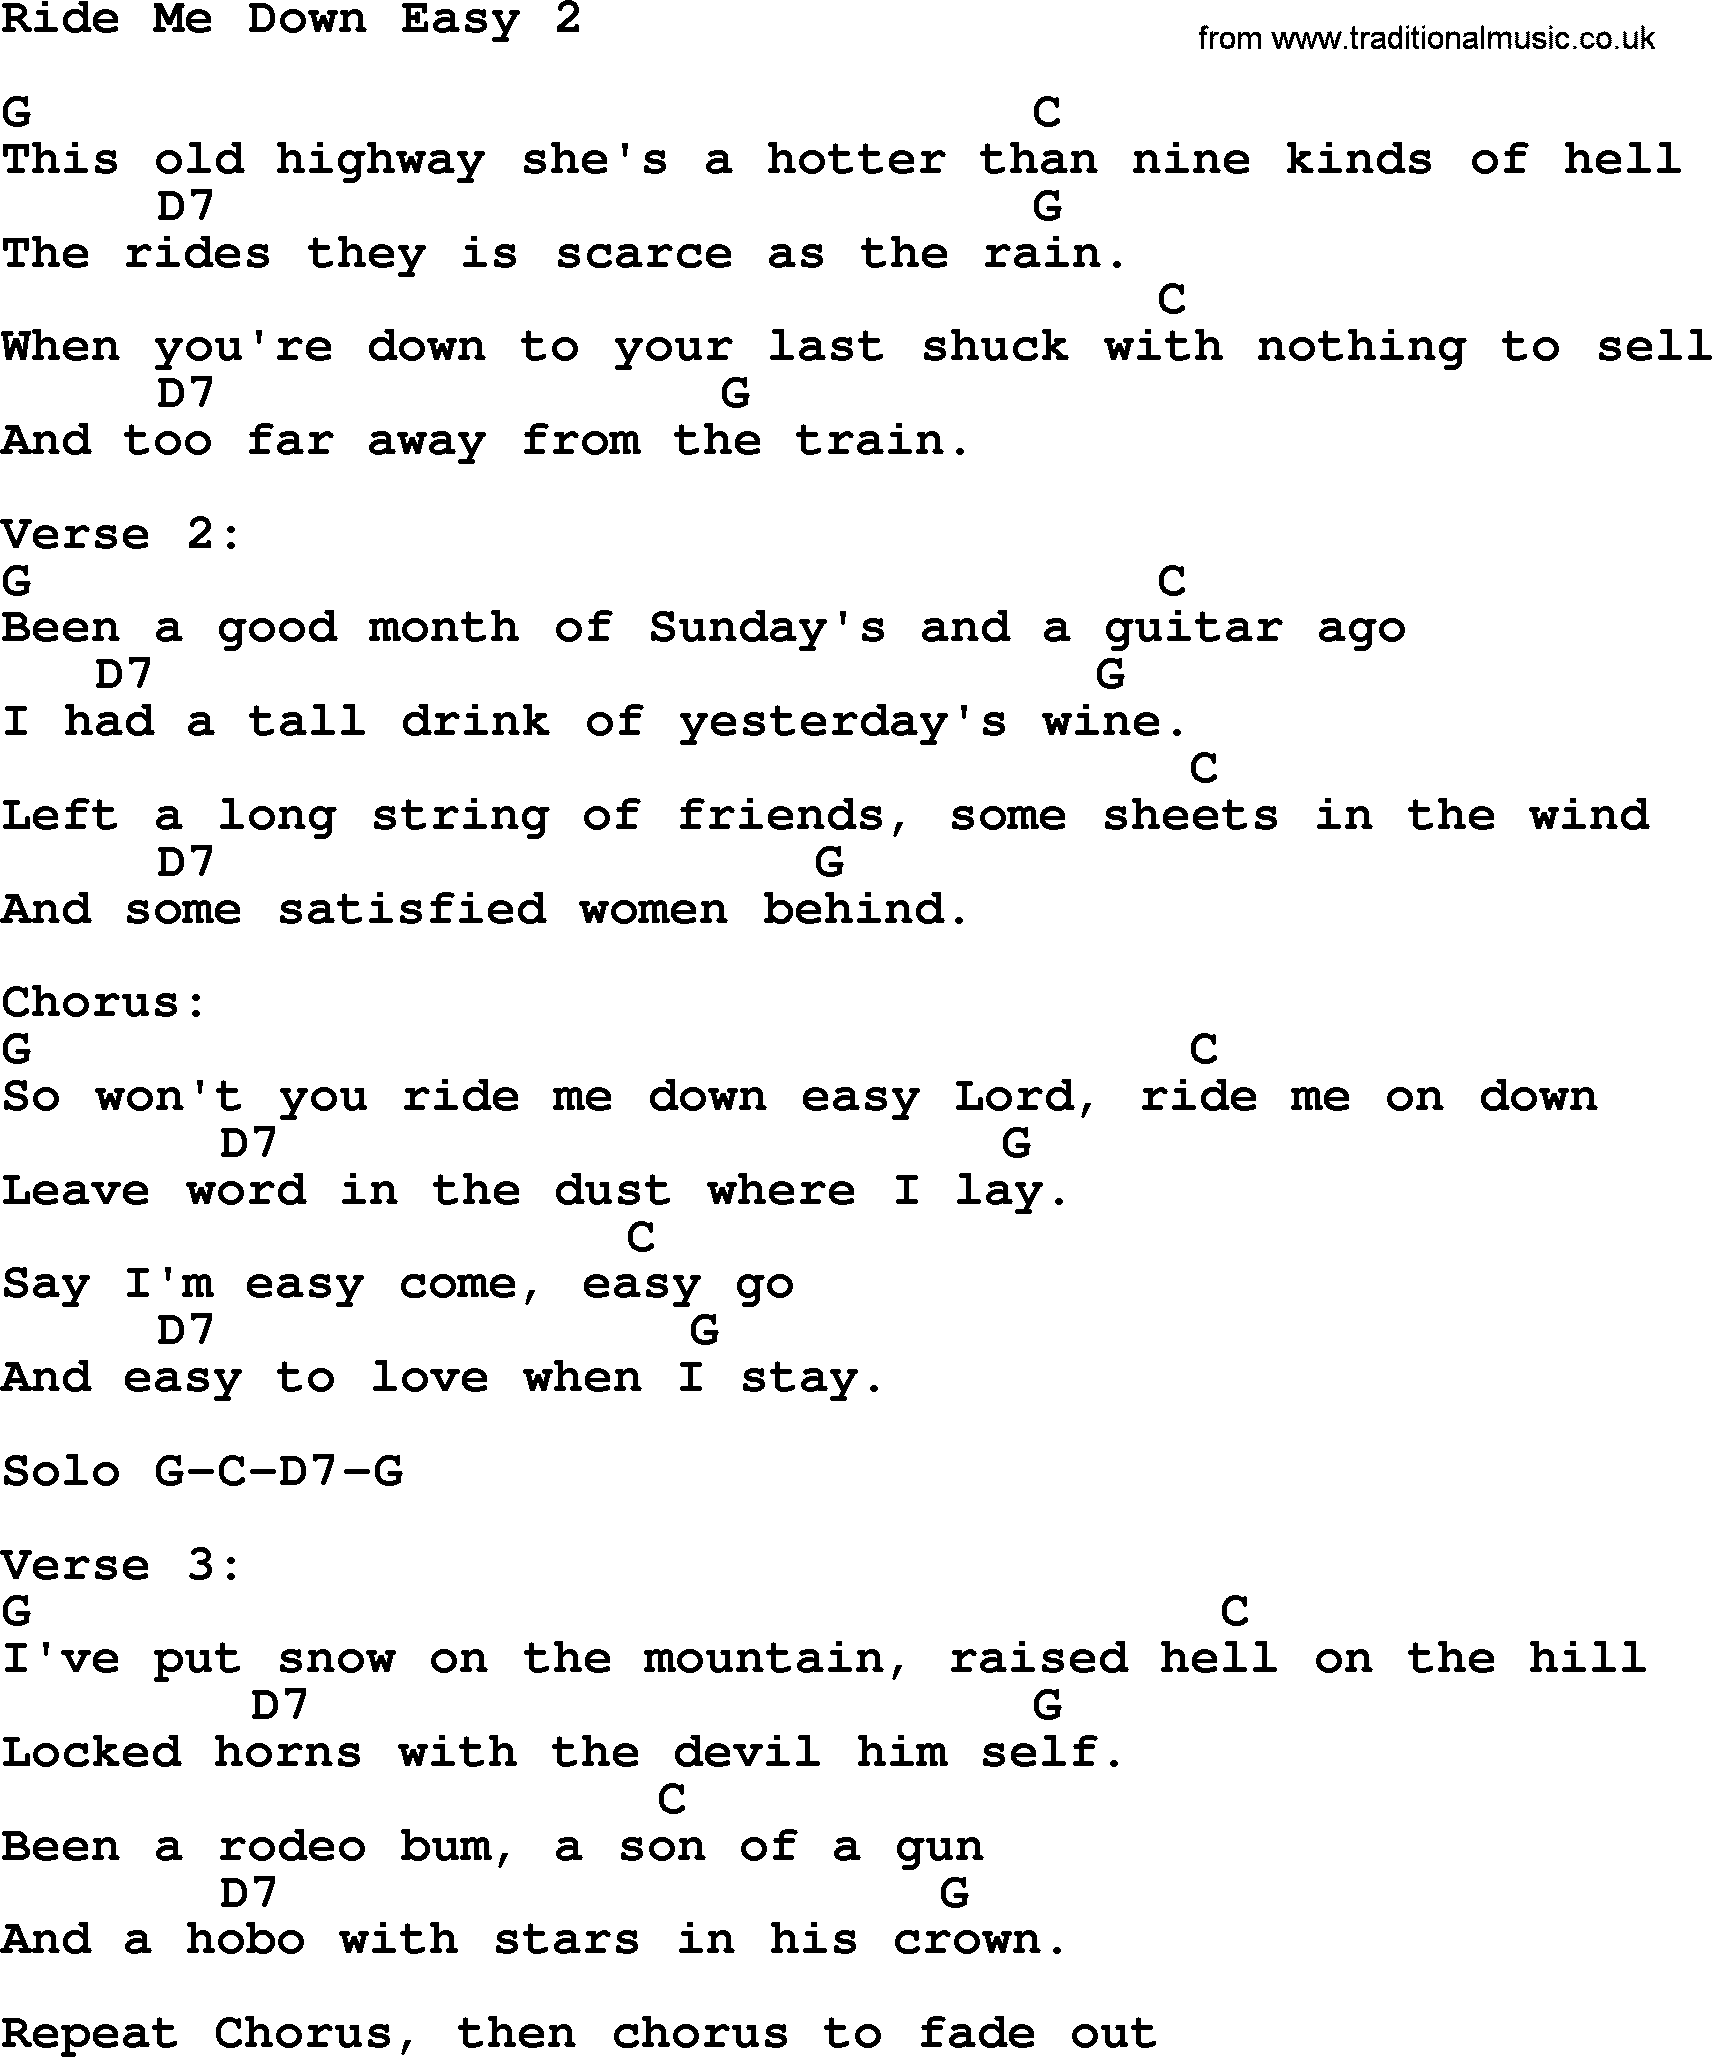 Bluegrass song: Ride Me Down Easy 2, lyrics and chords